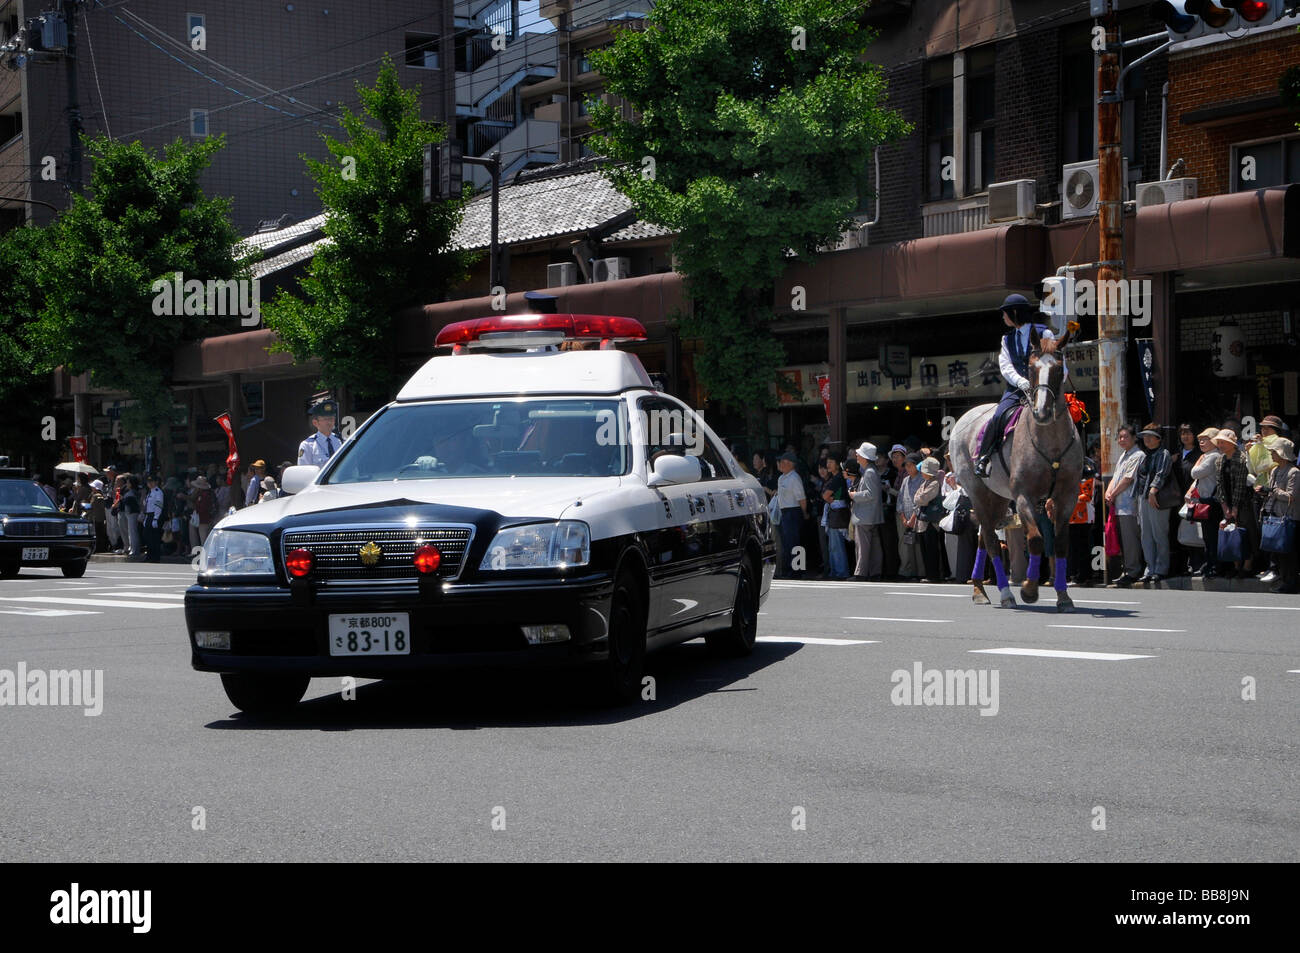 Japanese police on duty with police car and mounted police, Kyoto, Japan Stock Photo